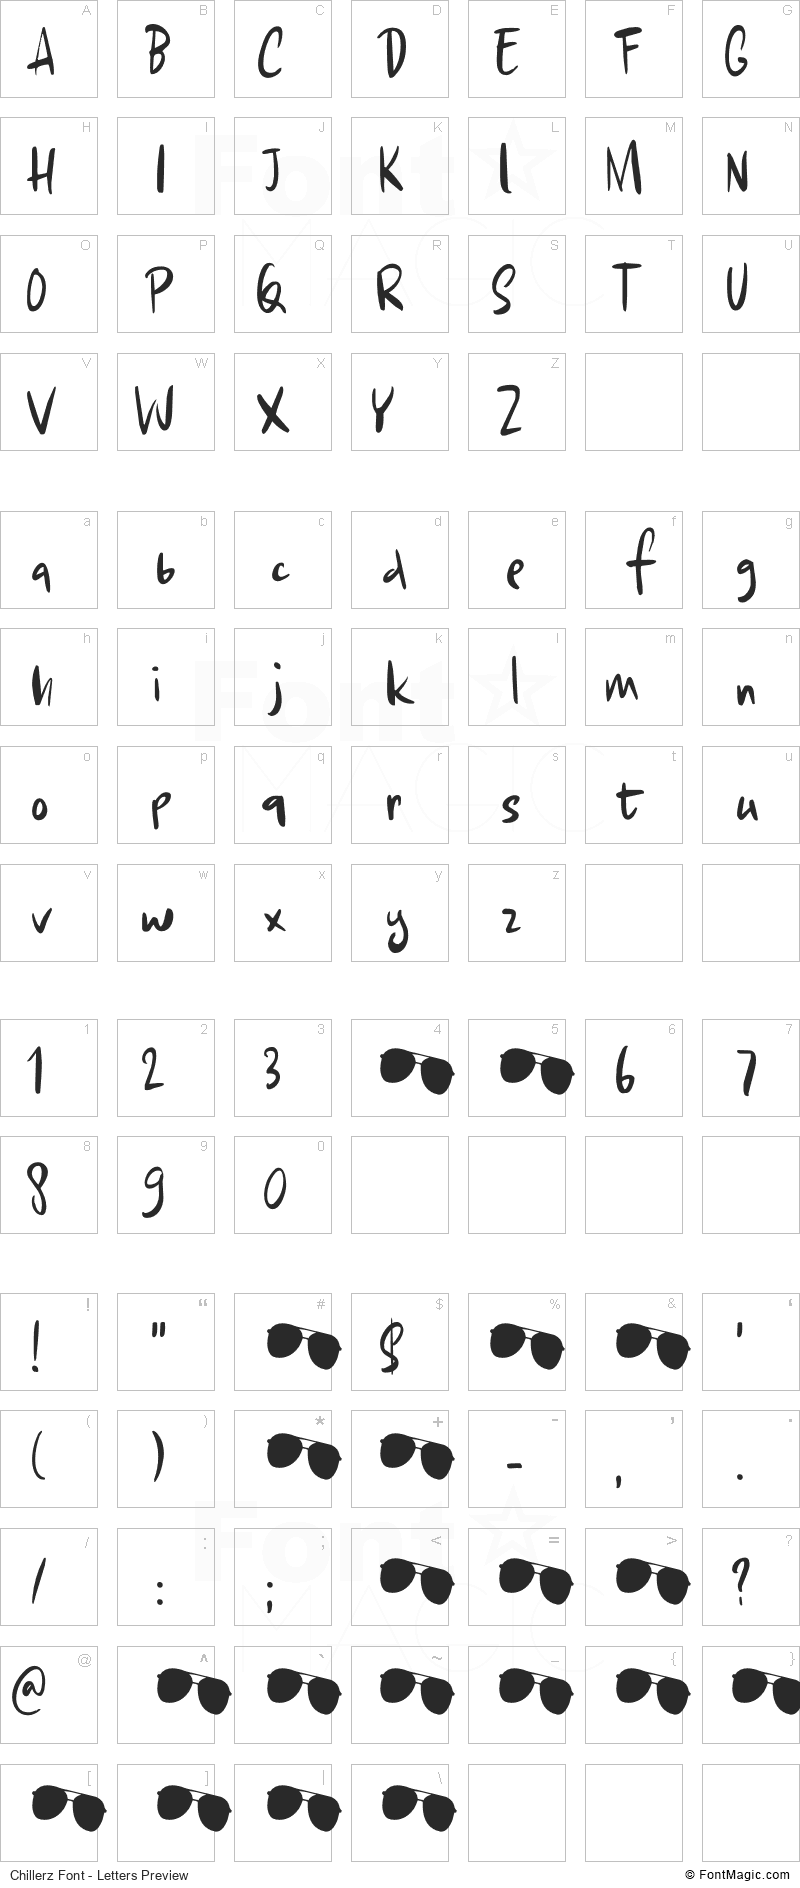 Chillerz Font - All Latters Preview Chart